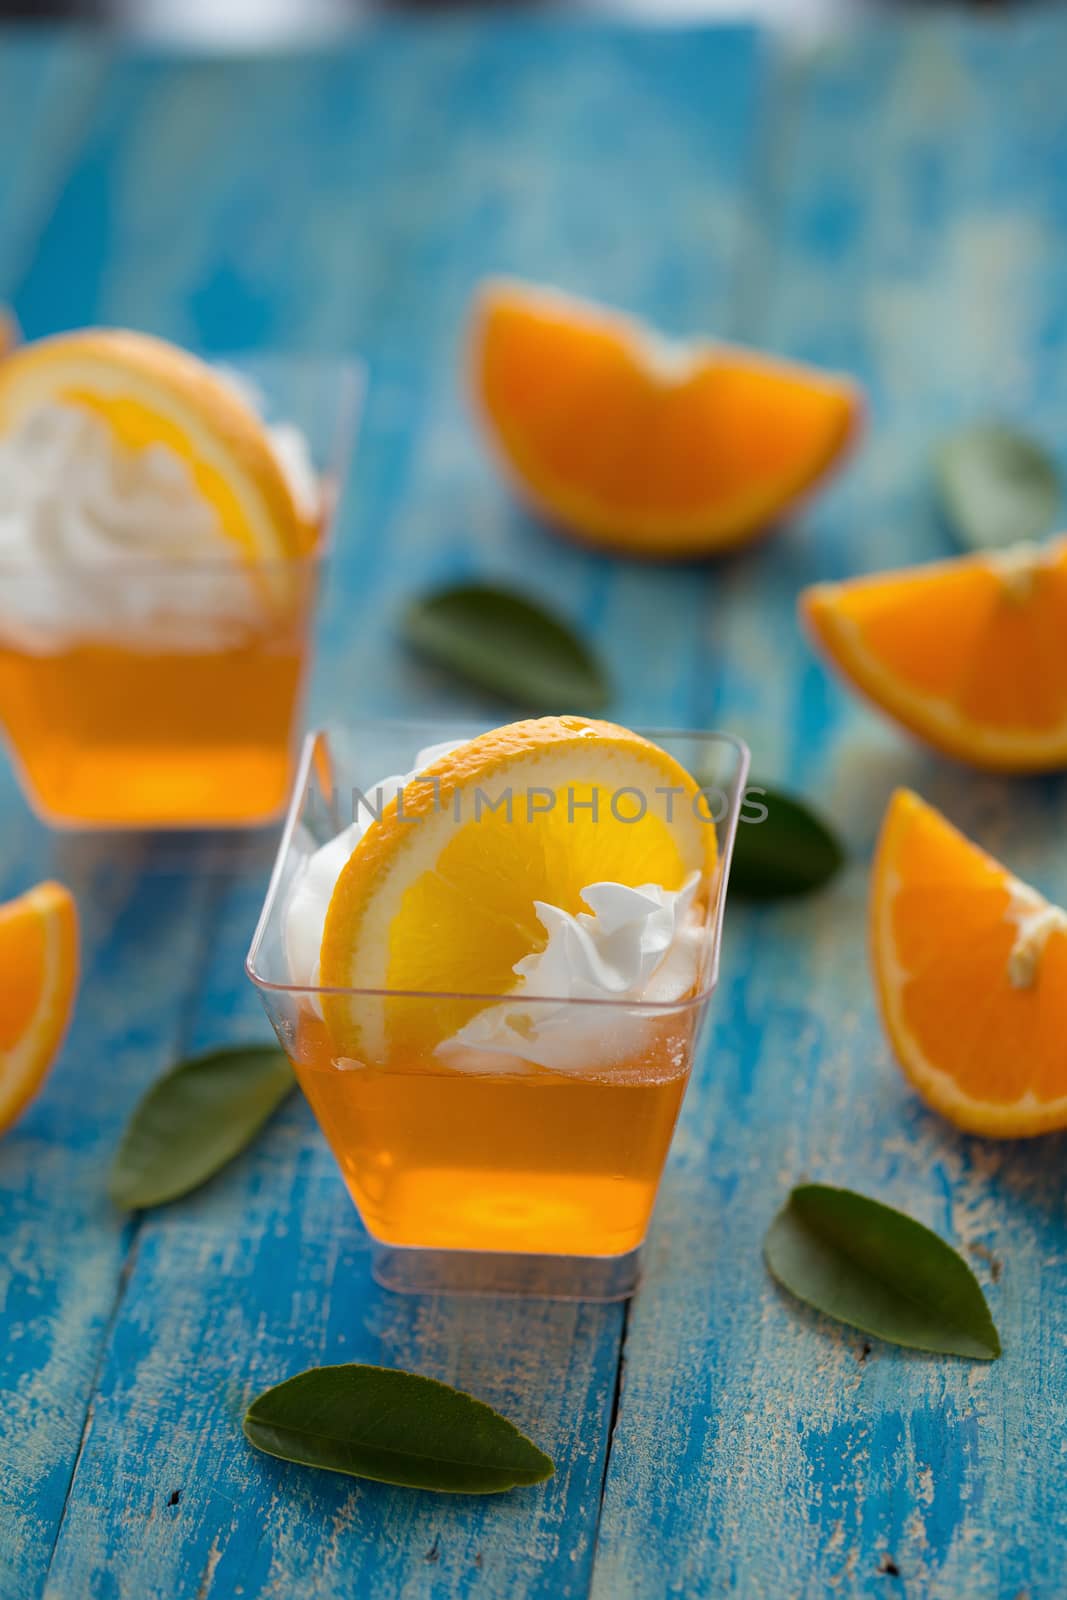 Orange jelly in a cup with whipped cream and orange sliced on blue wooden background.